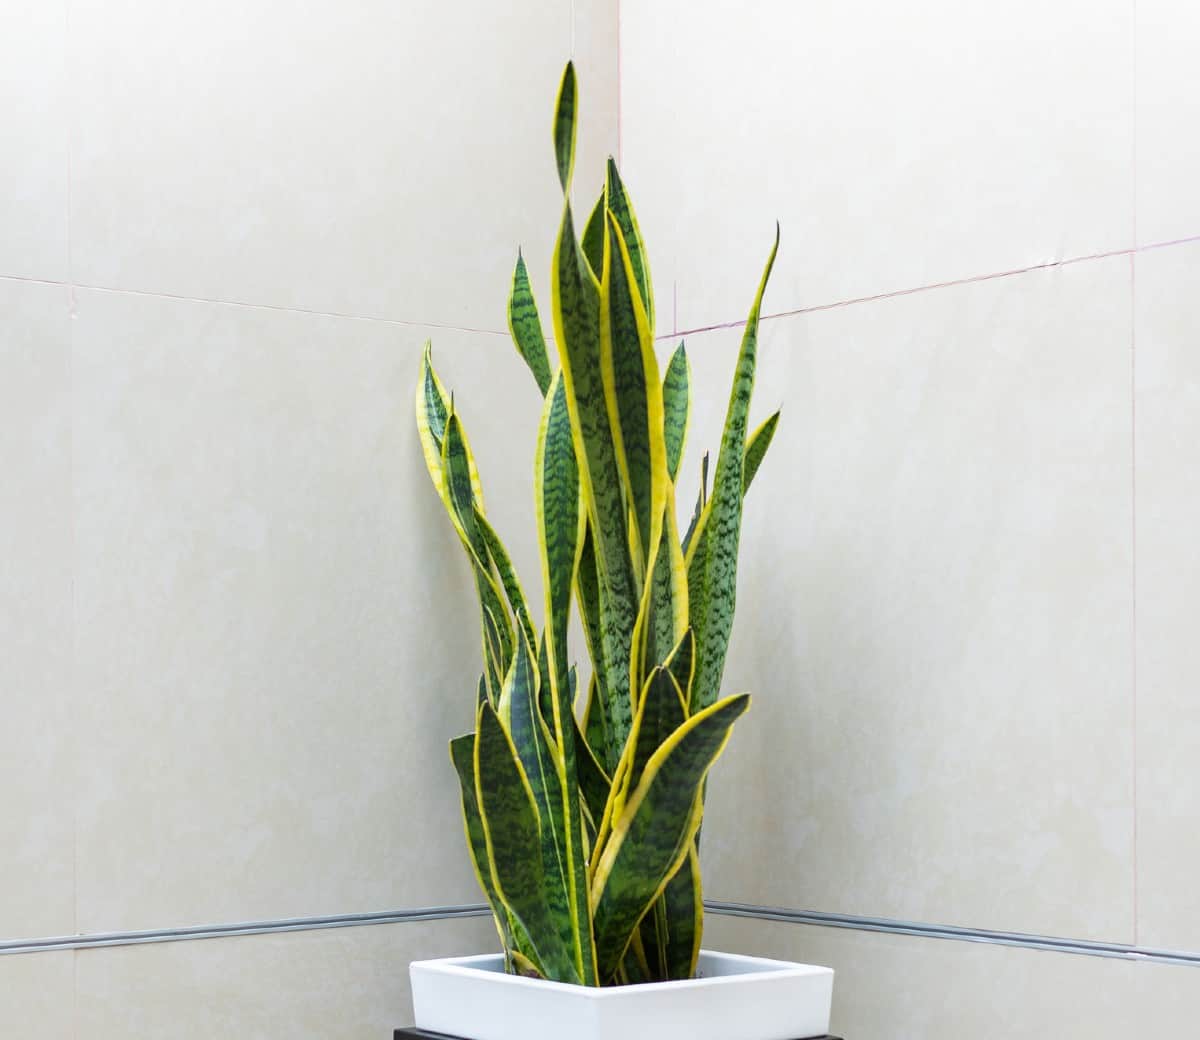 The snake plant absorbs toxins from indoor air.